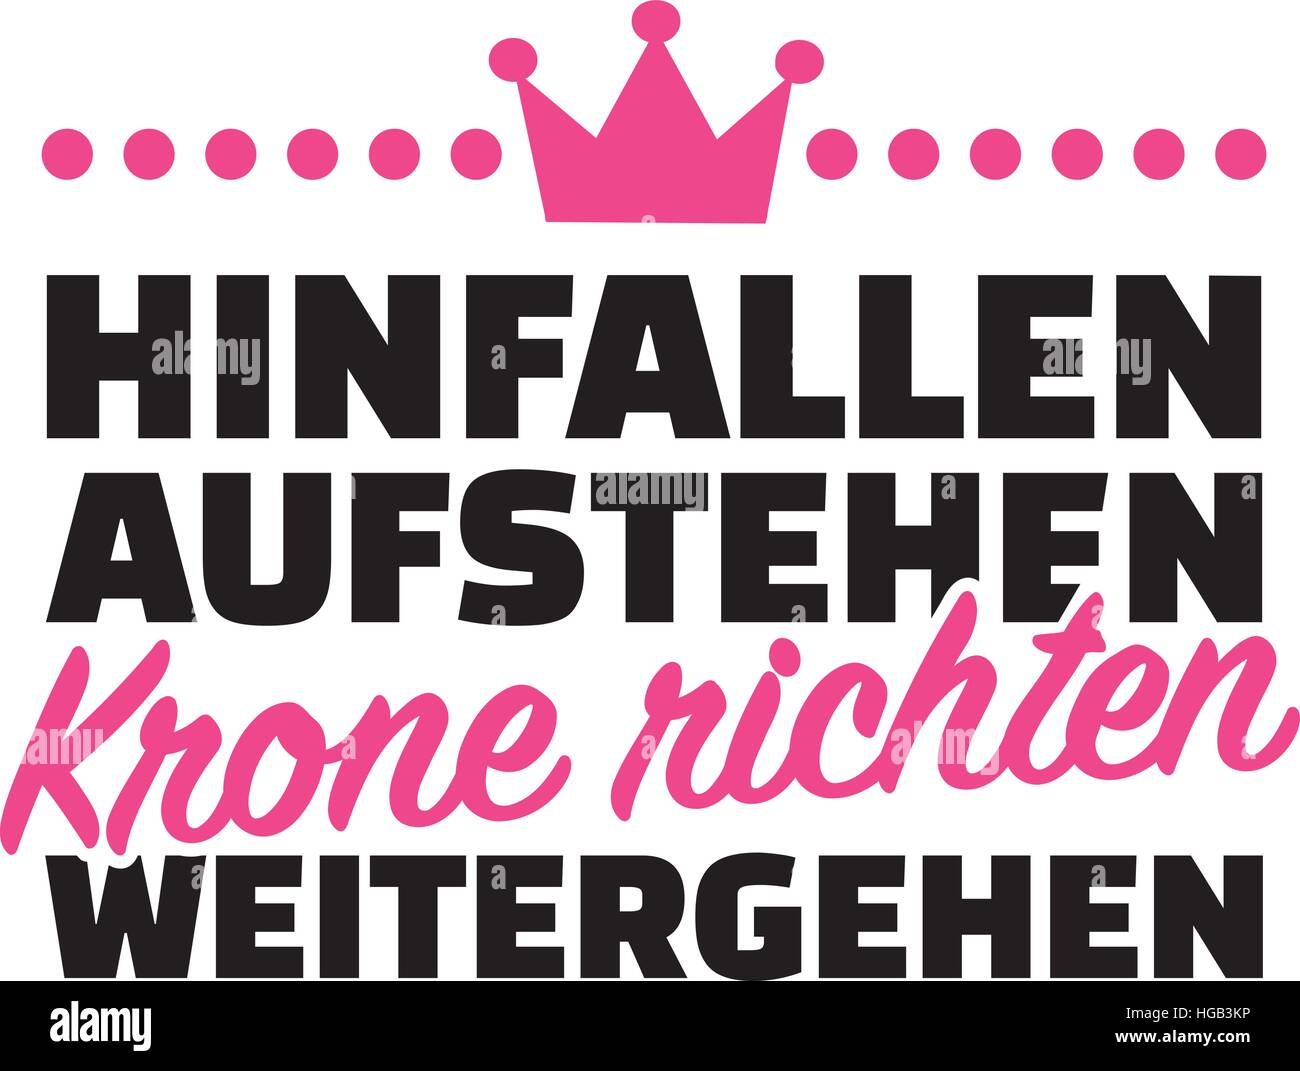 Fall down, get up, straighten crown, carry on. German. Stock Vector